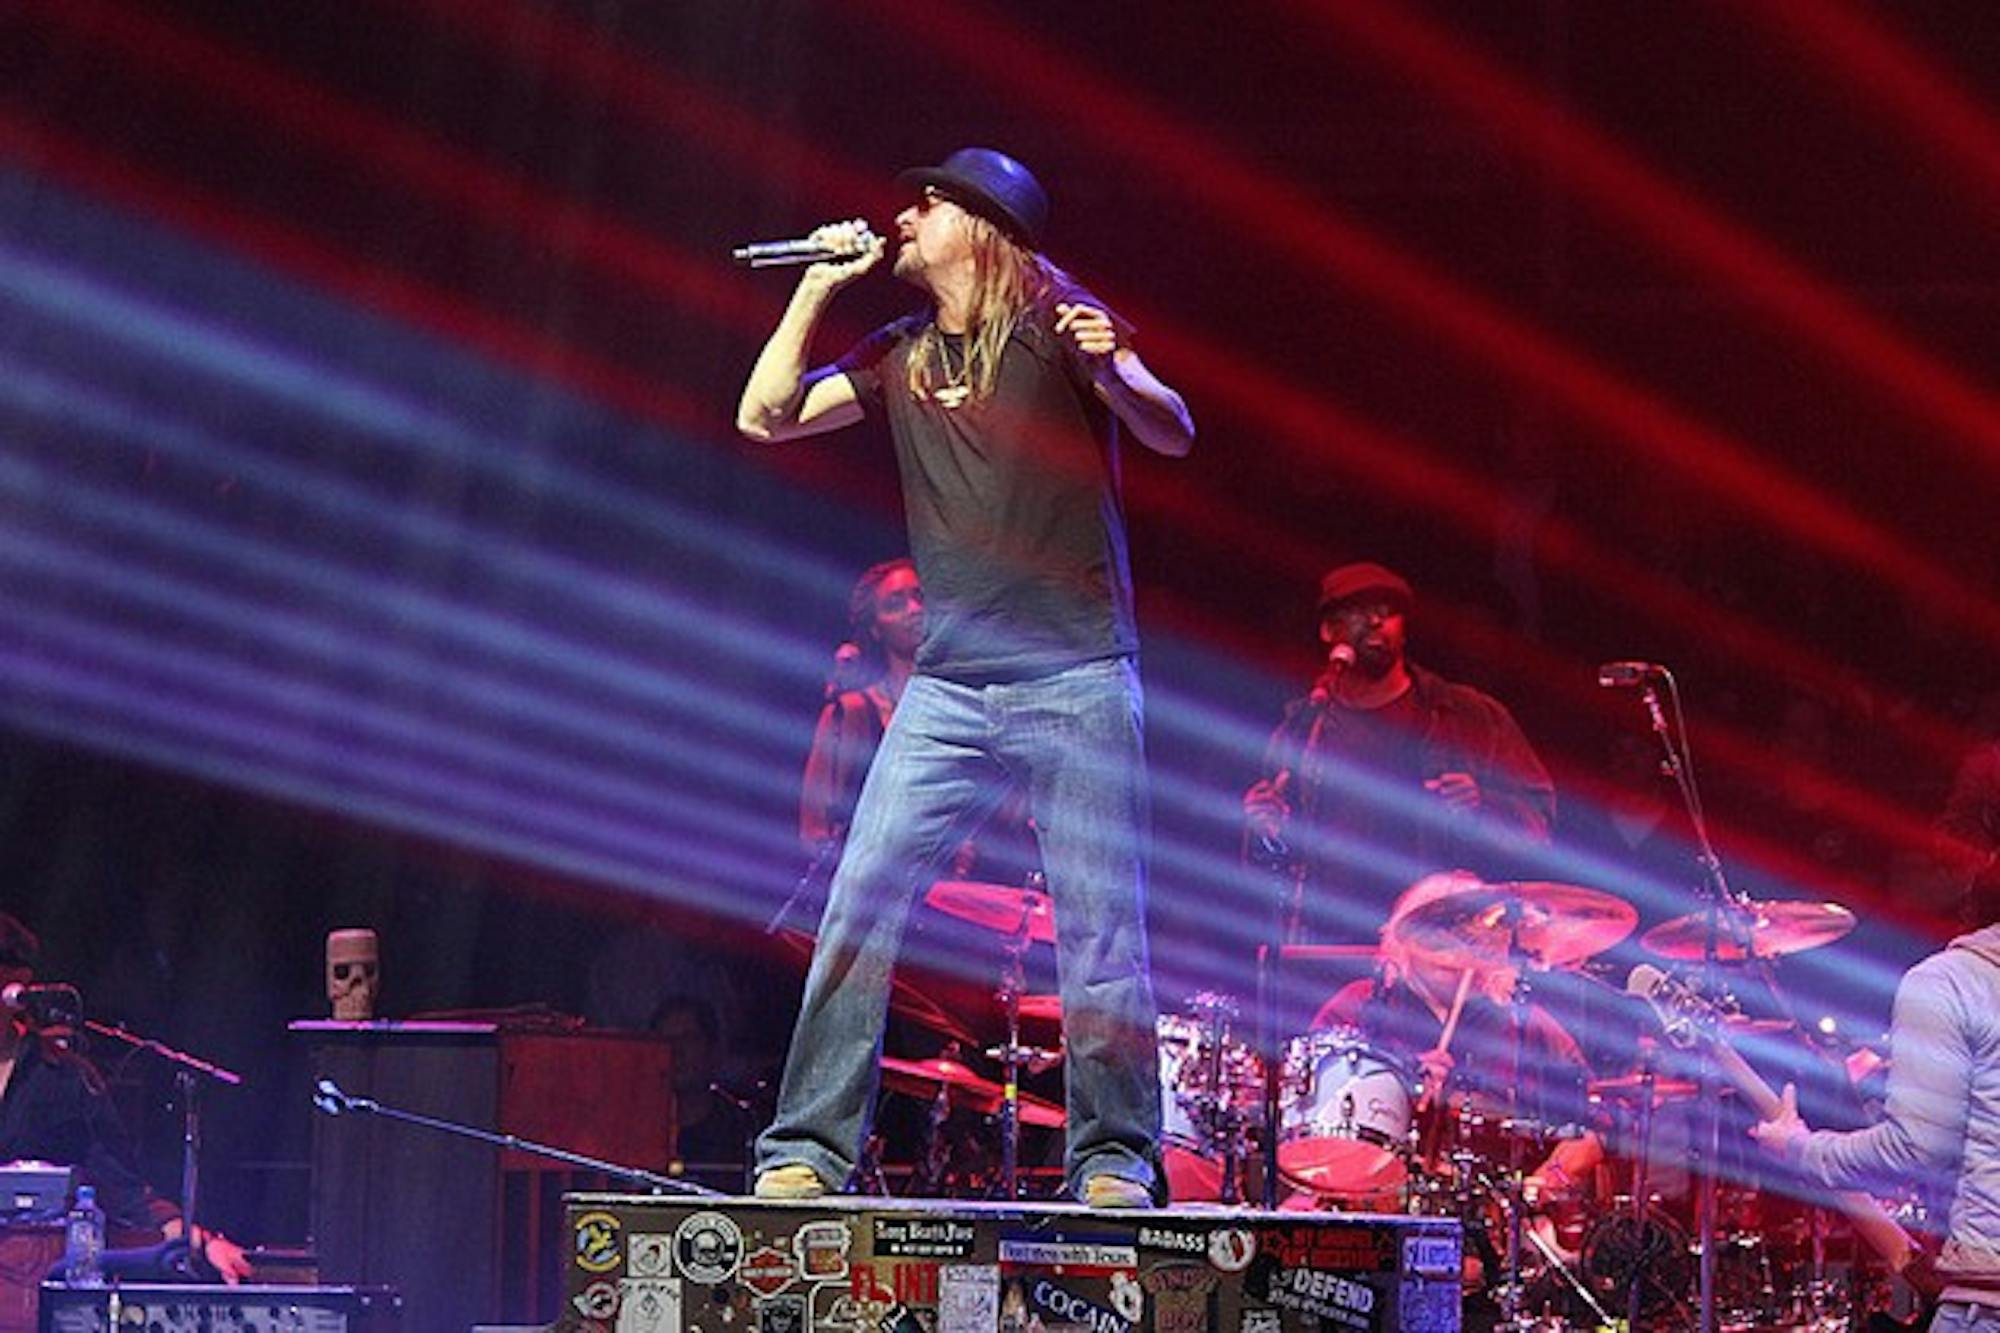 Kid Rock performed several songs at the event before former Gov. Mitt Romney took the stage to address the crowd of over 12,000.